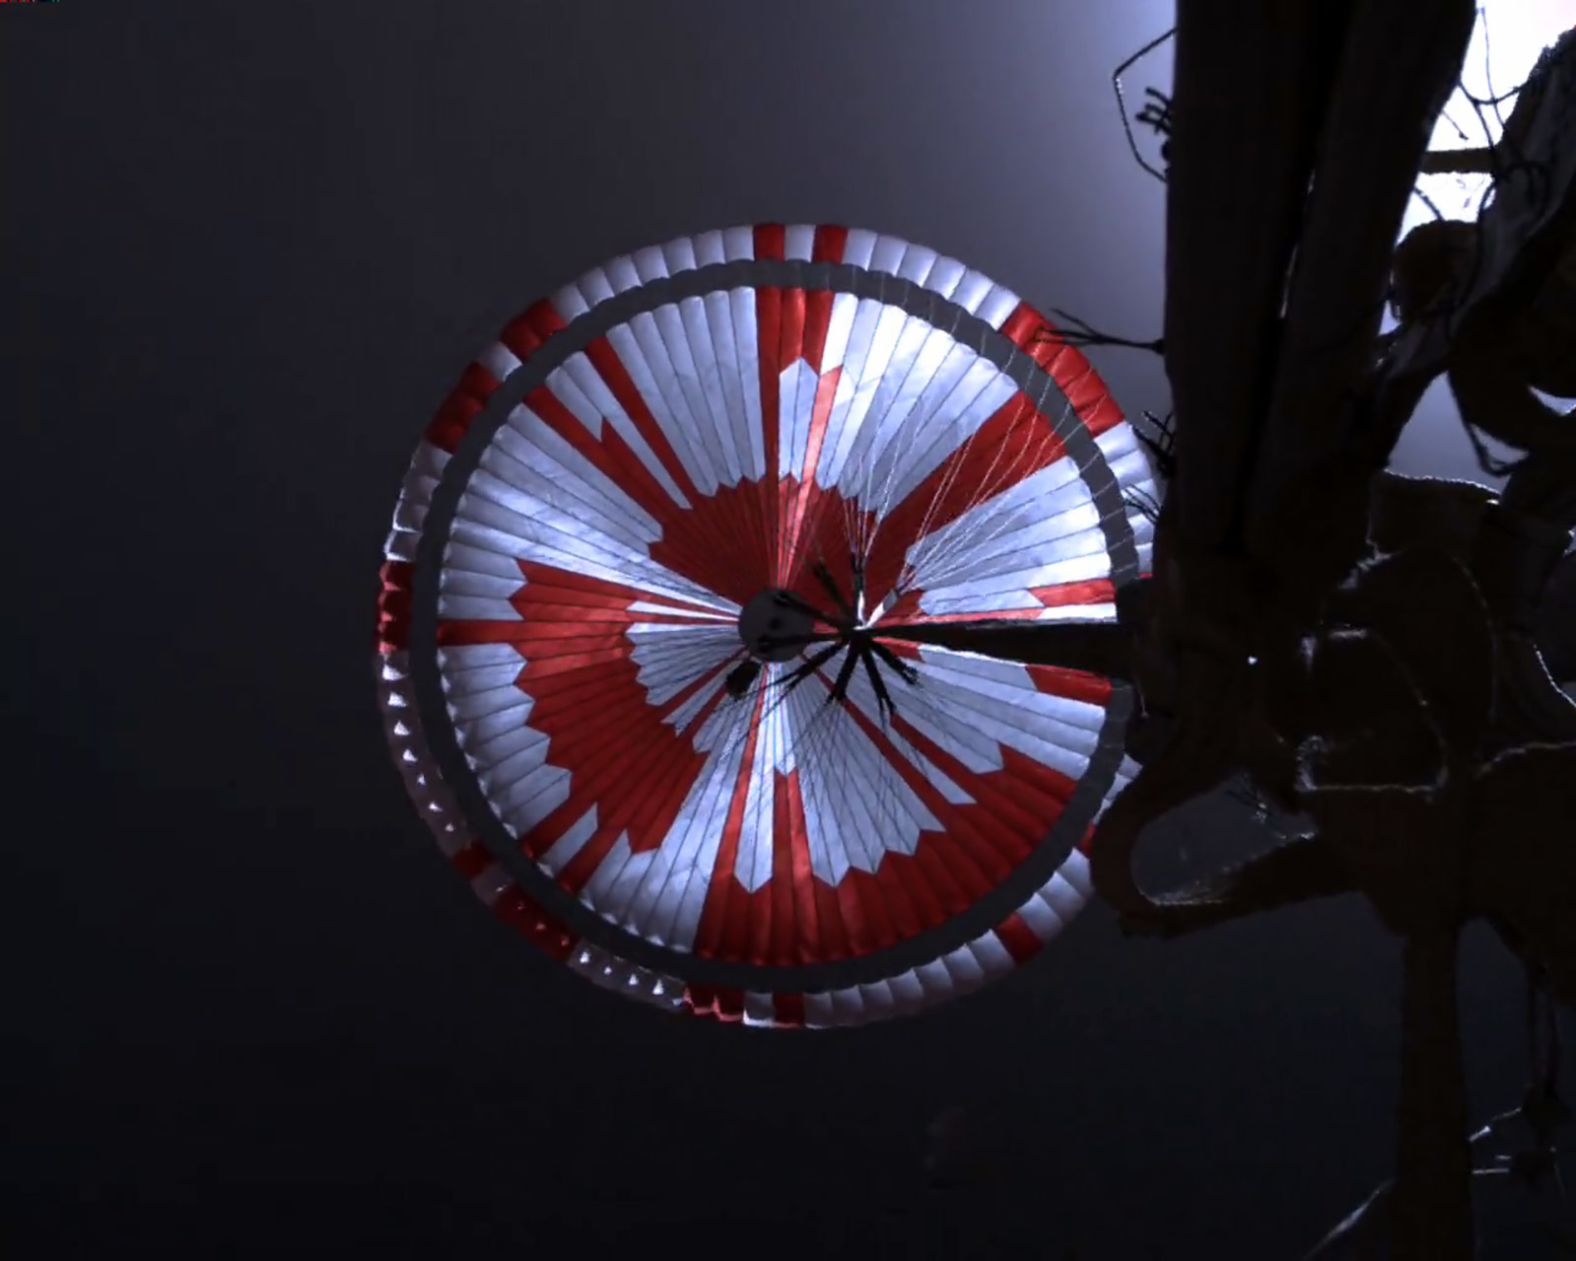 The rover took this image of its parachute during its descent to Mars.